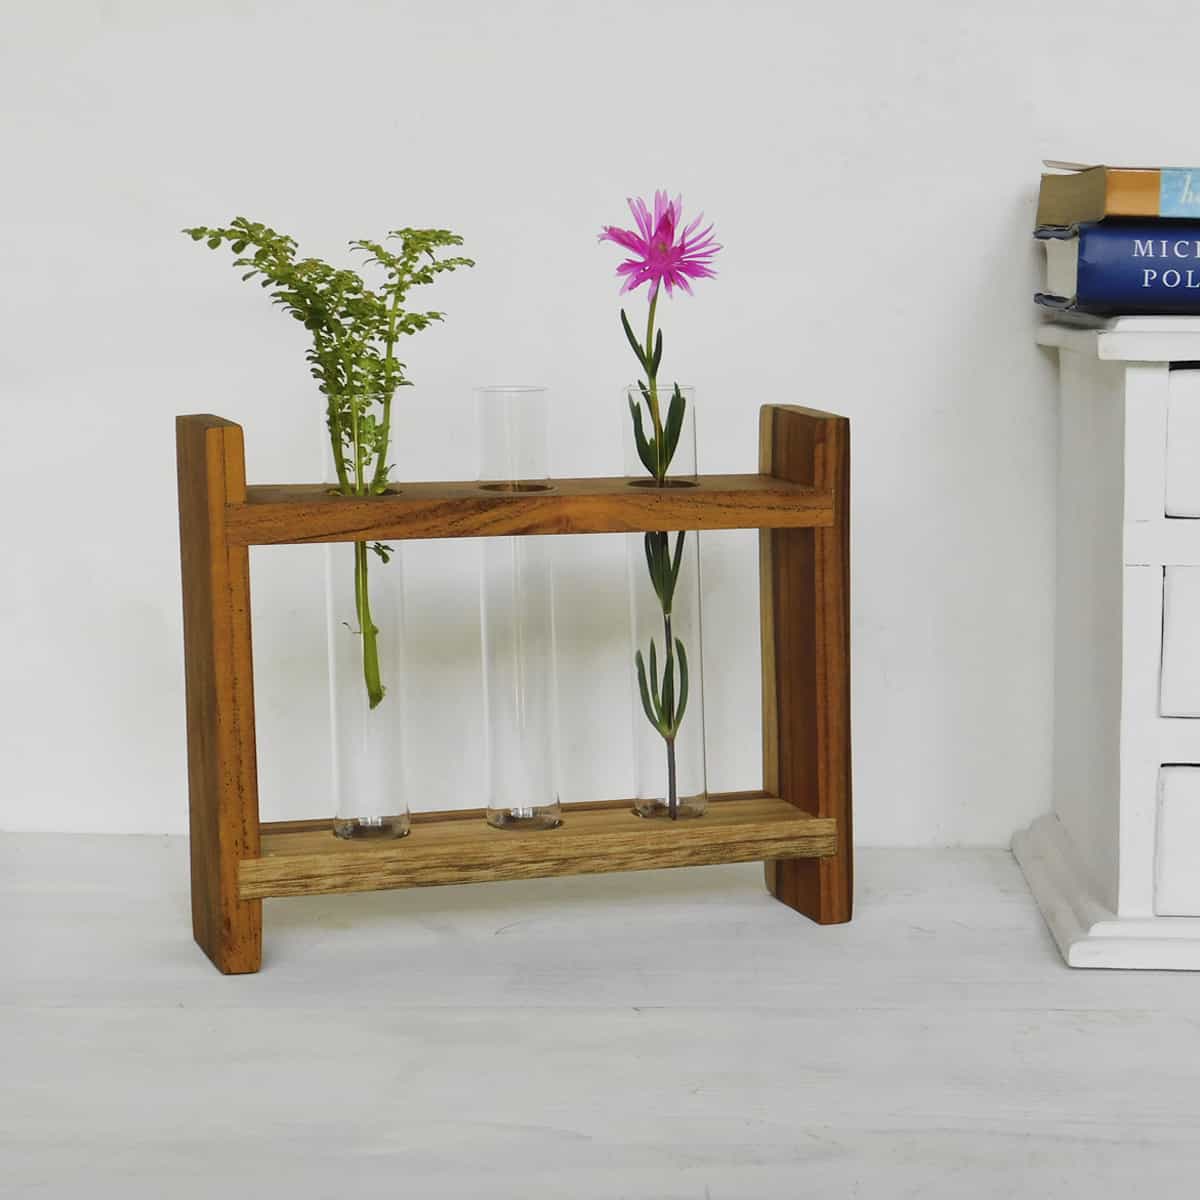 three test tube plant holders with their wooden frame displaying a pink flower and an herb against a white background